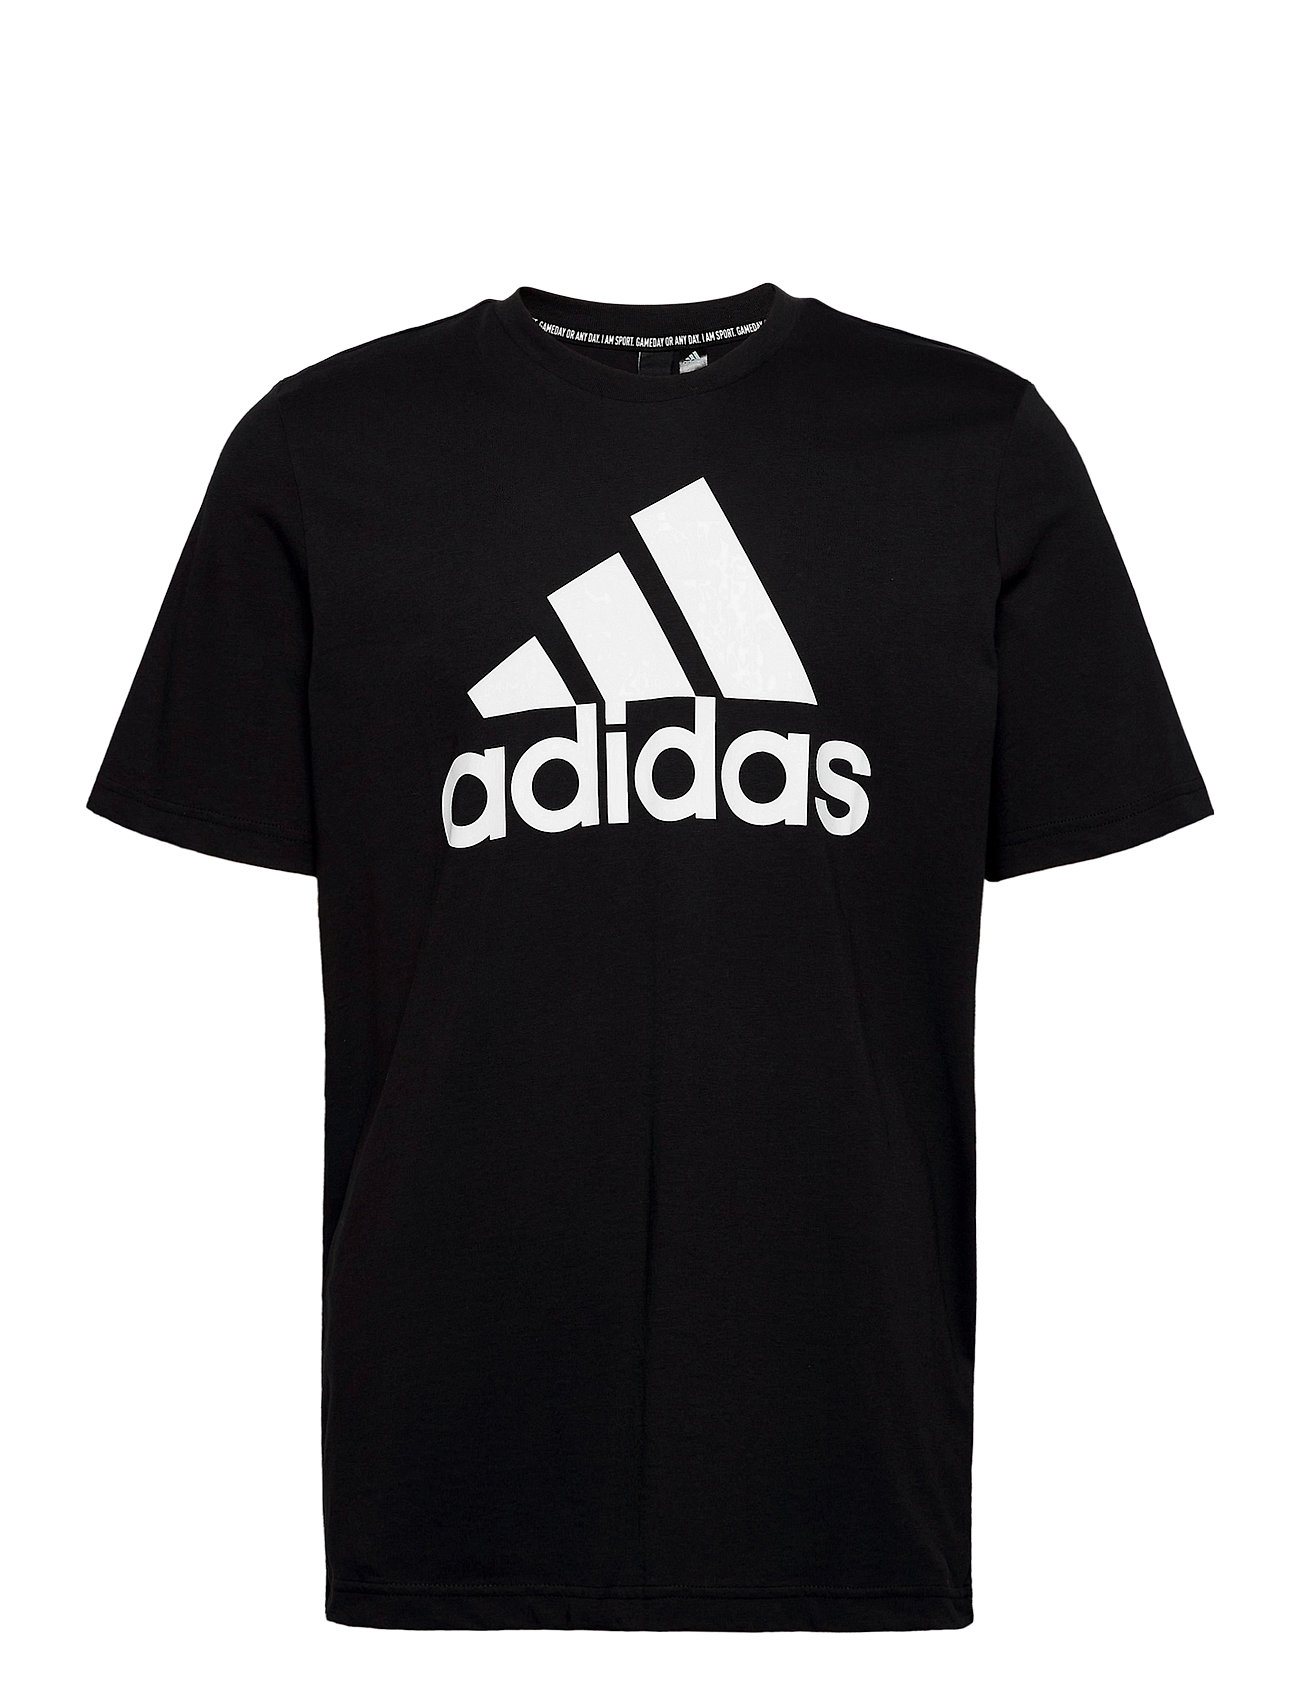 adidas Performance Mh Bos Tee (Black), (18.71 €) | Large selection of  outlet-styles | Booztlet.com